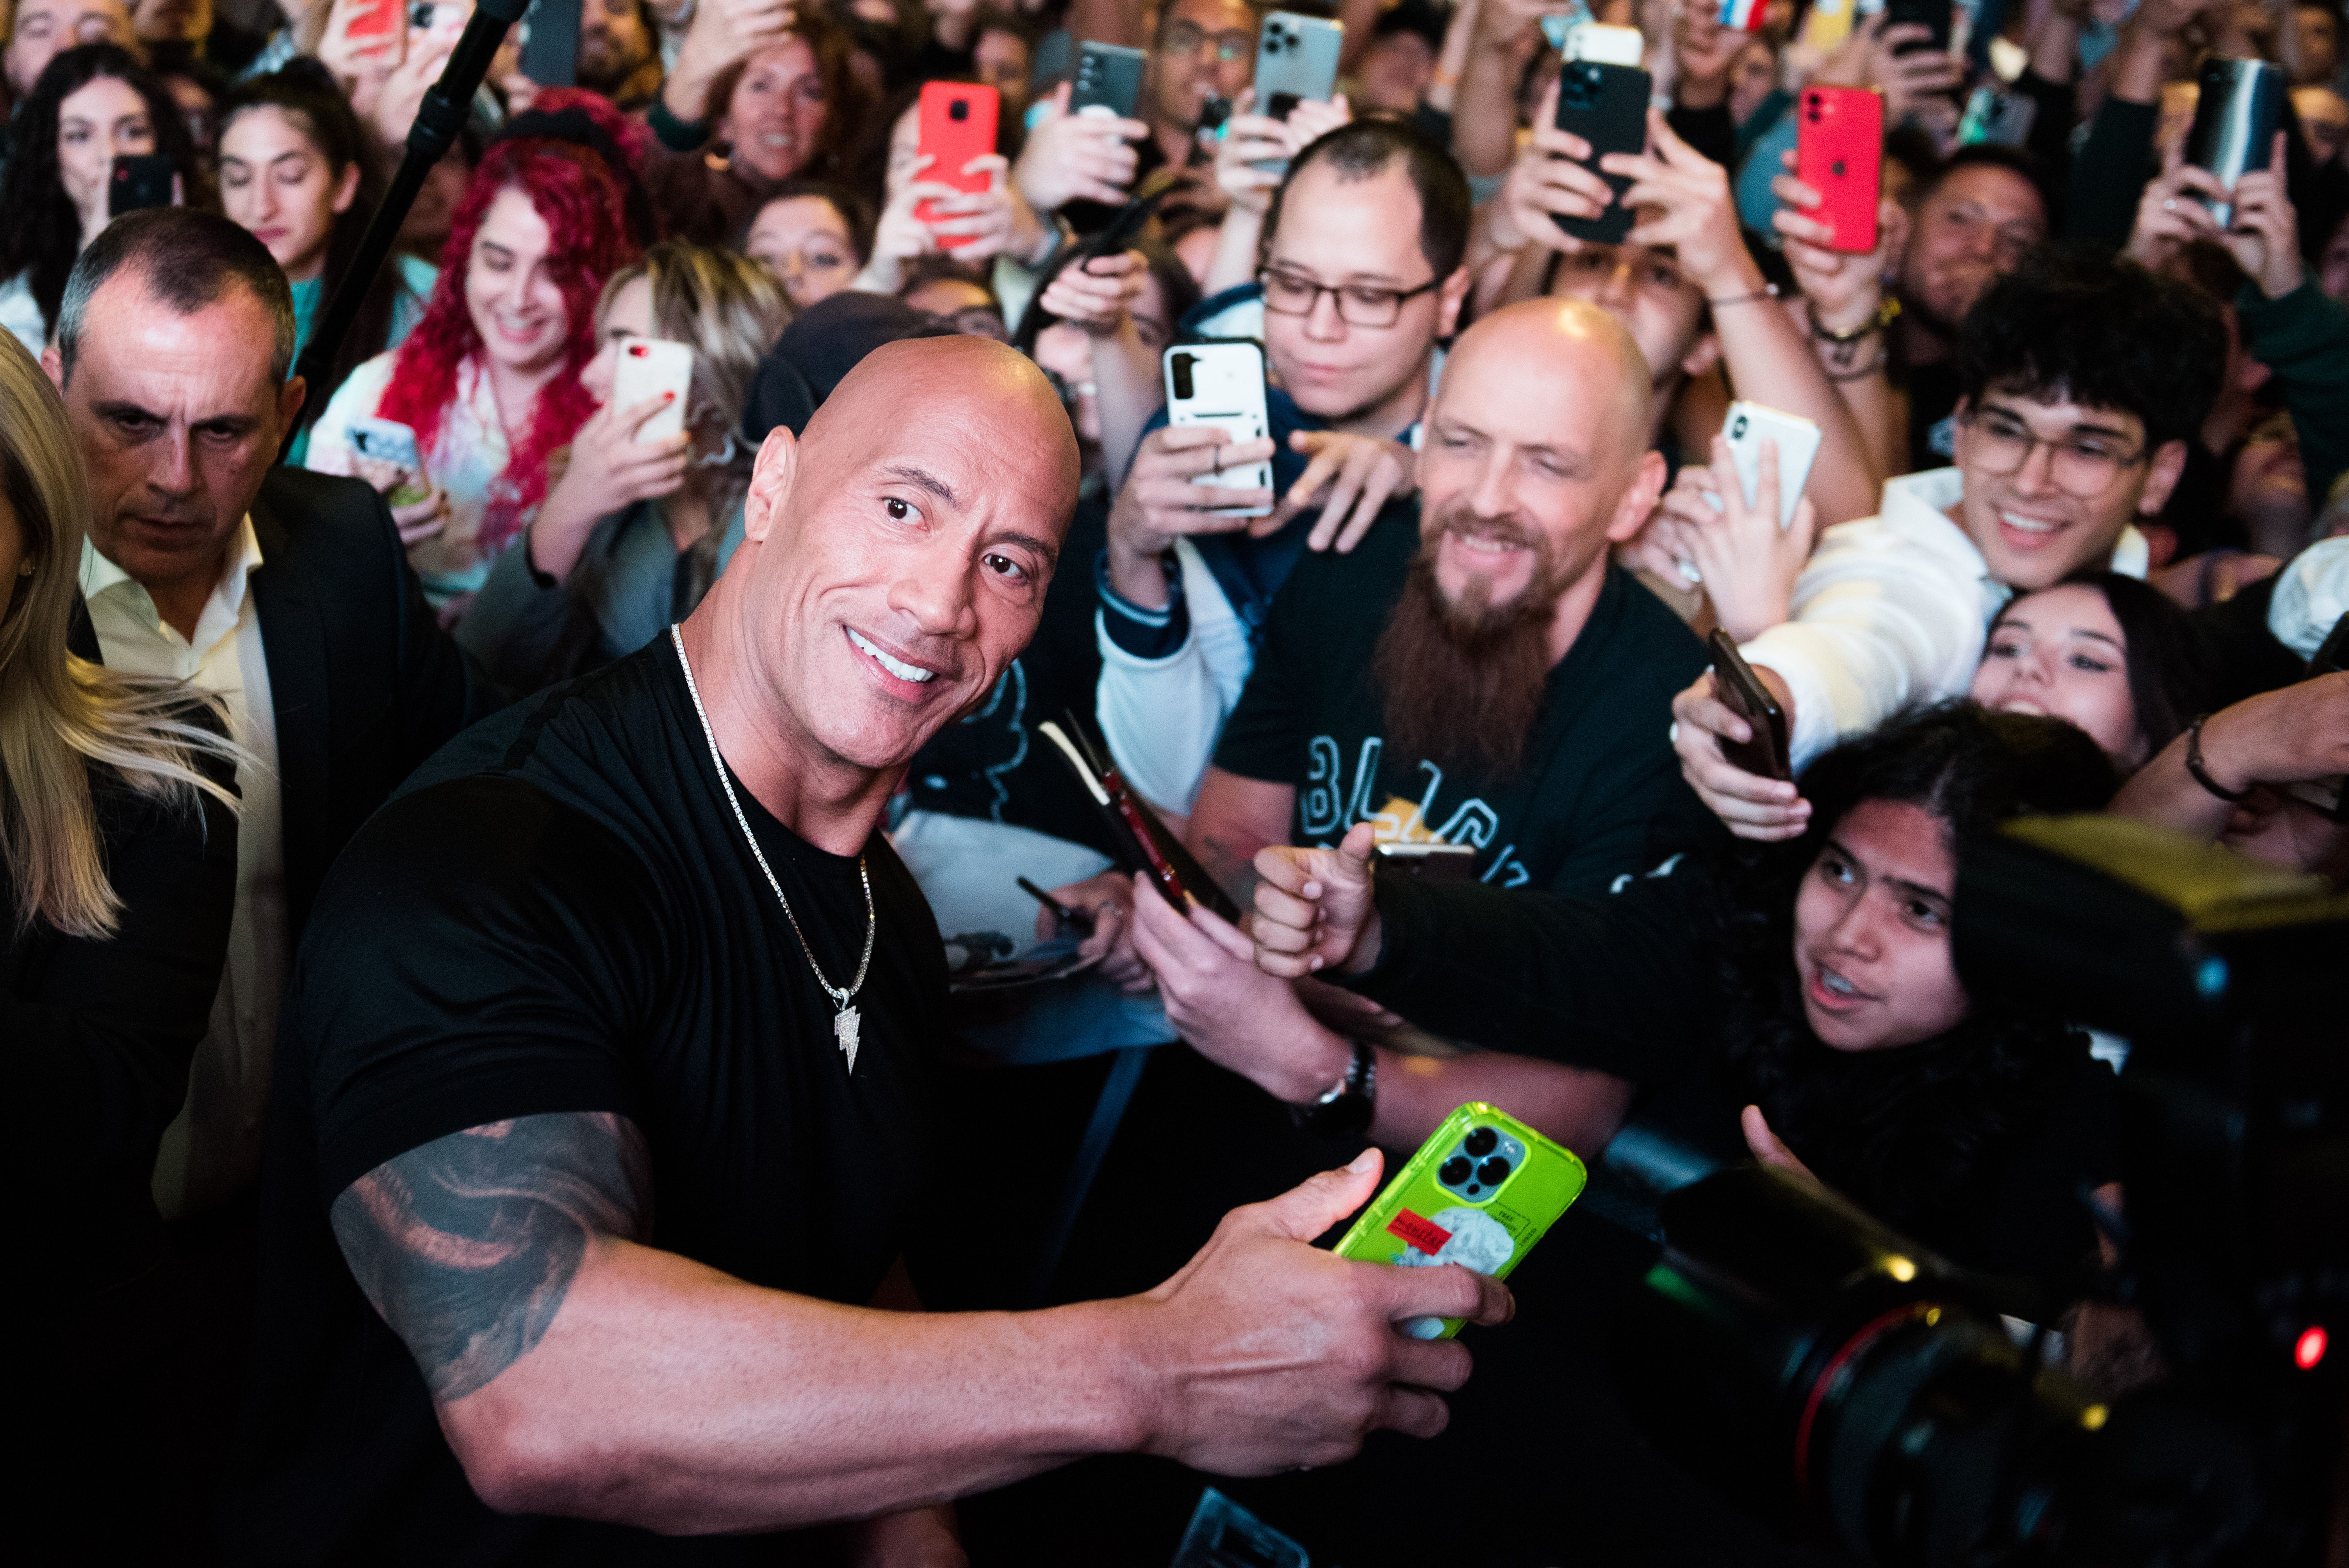 Actor Dwayne Johnson poses with fans at the Black Adam premiere